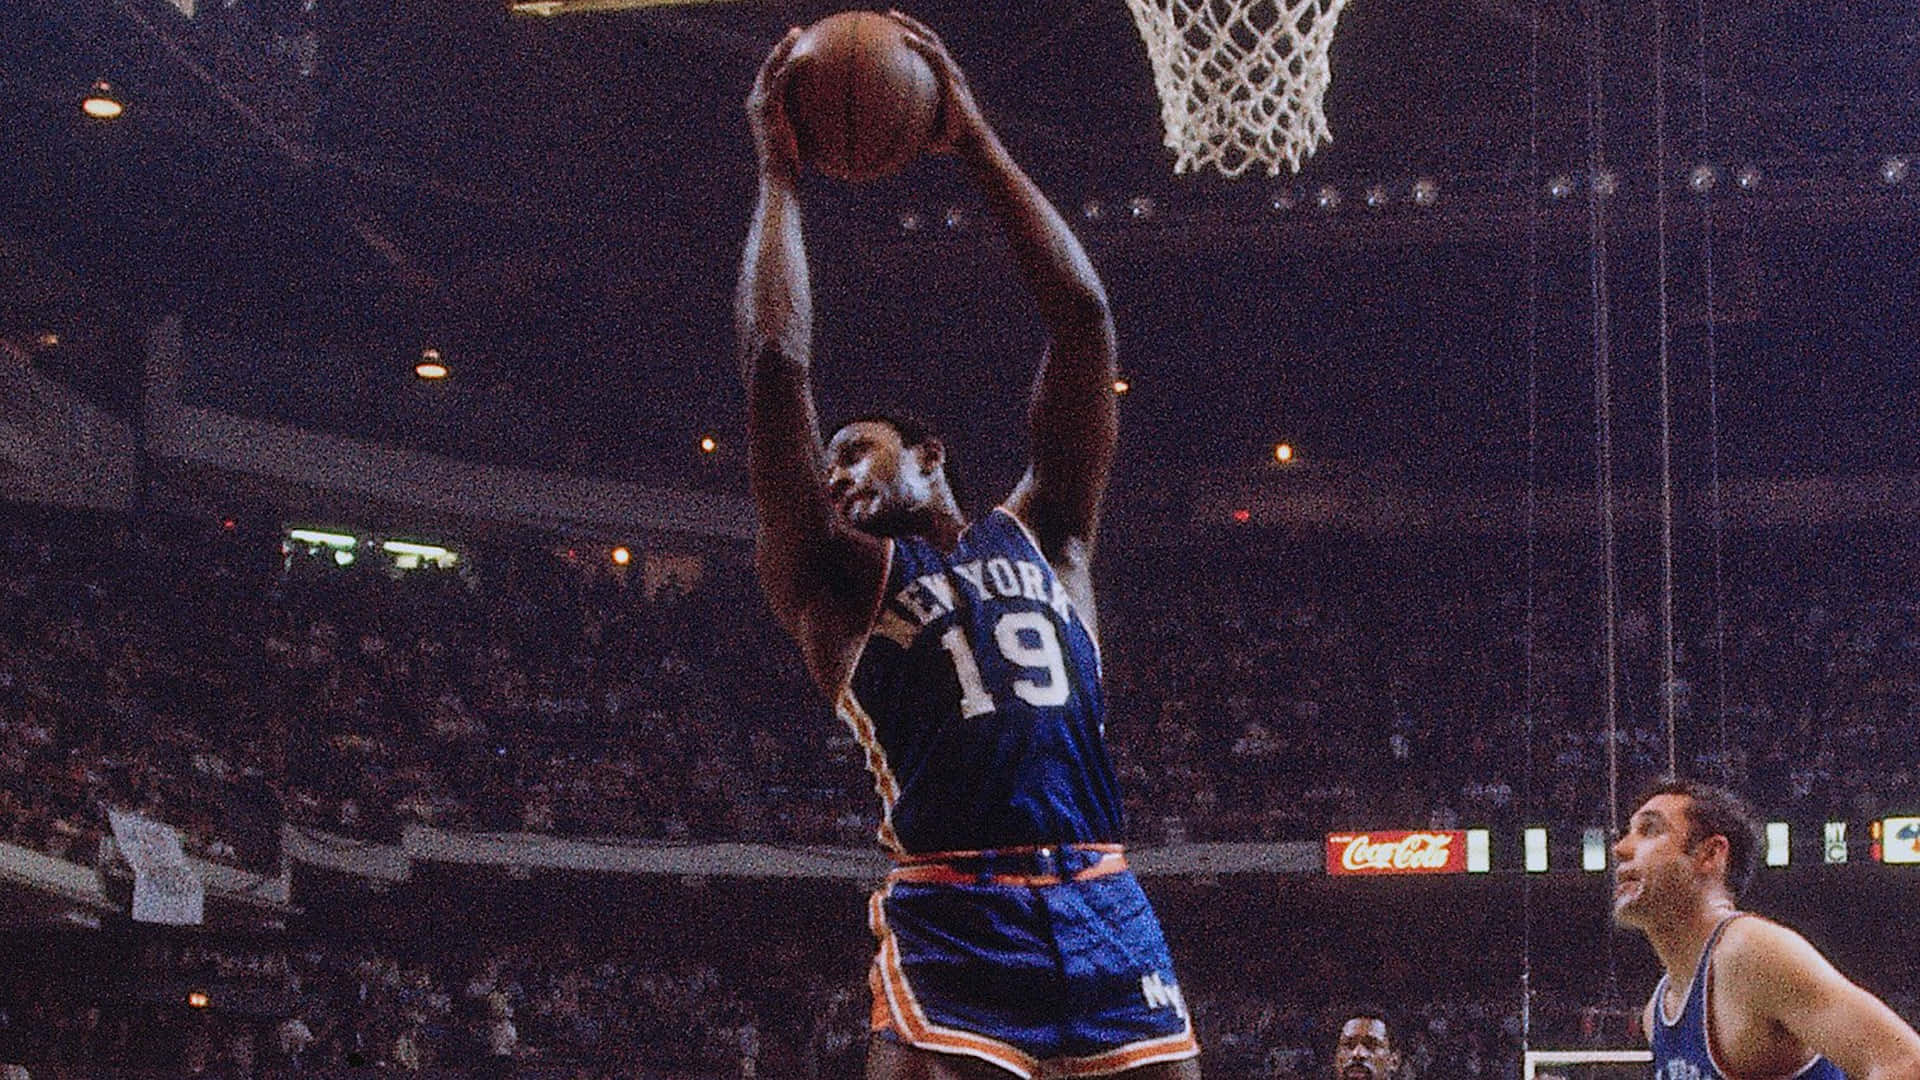 Willis Reed Tries To Dunk Ball Wallpaper